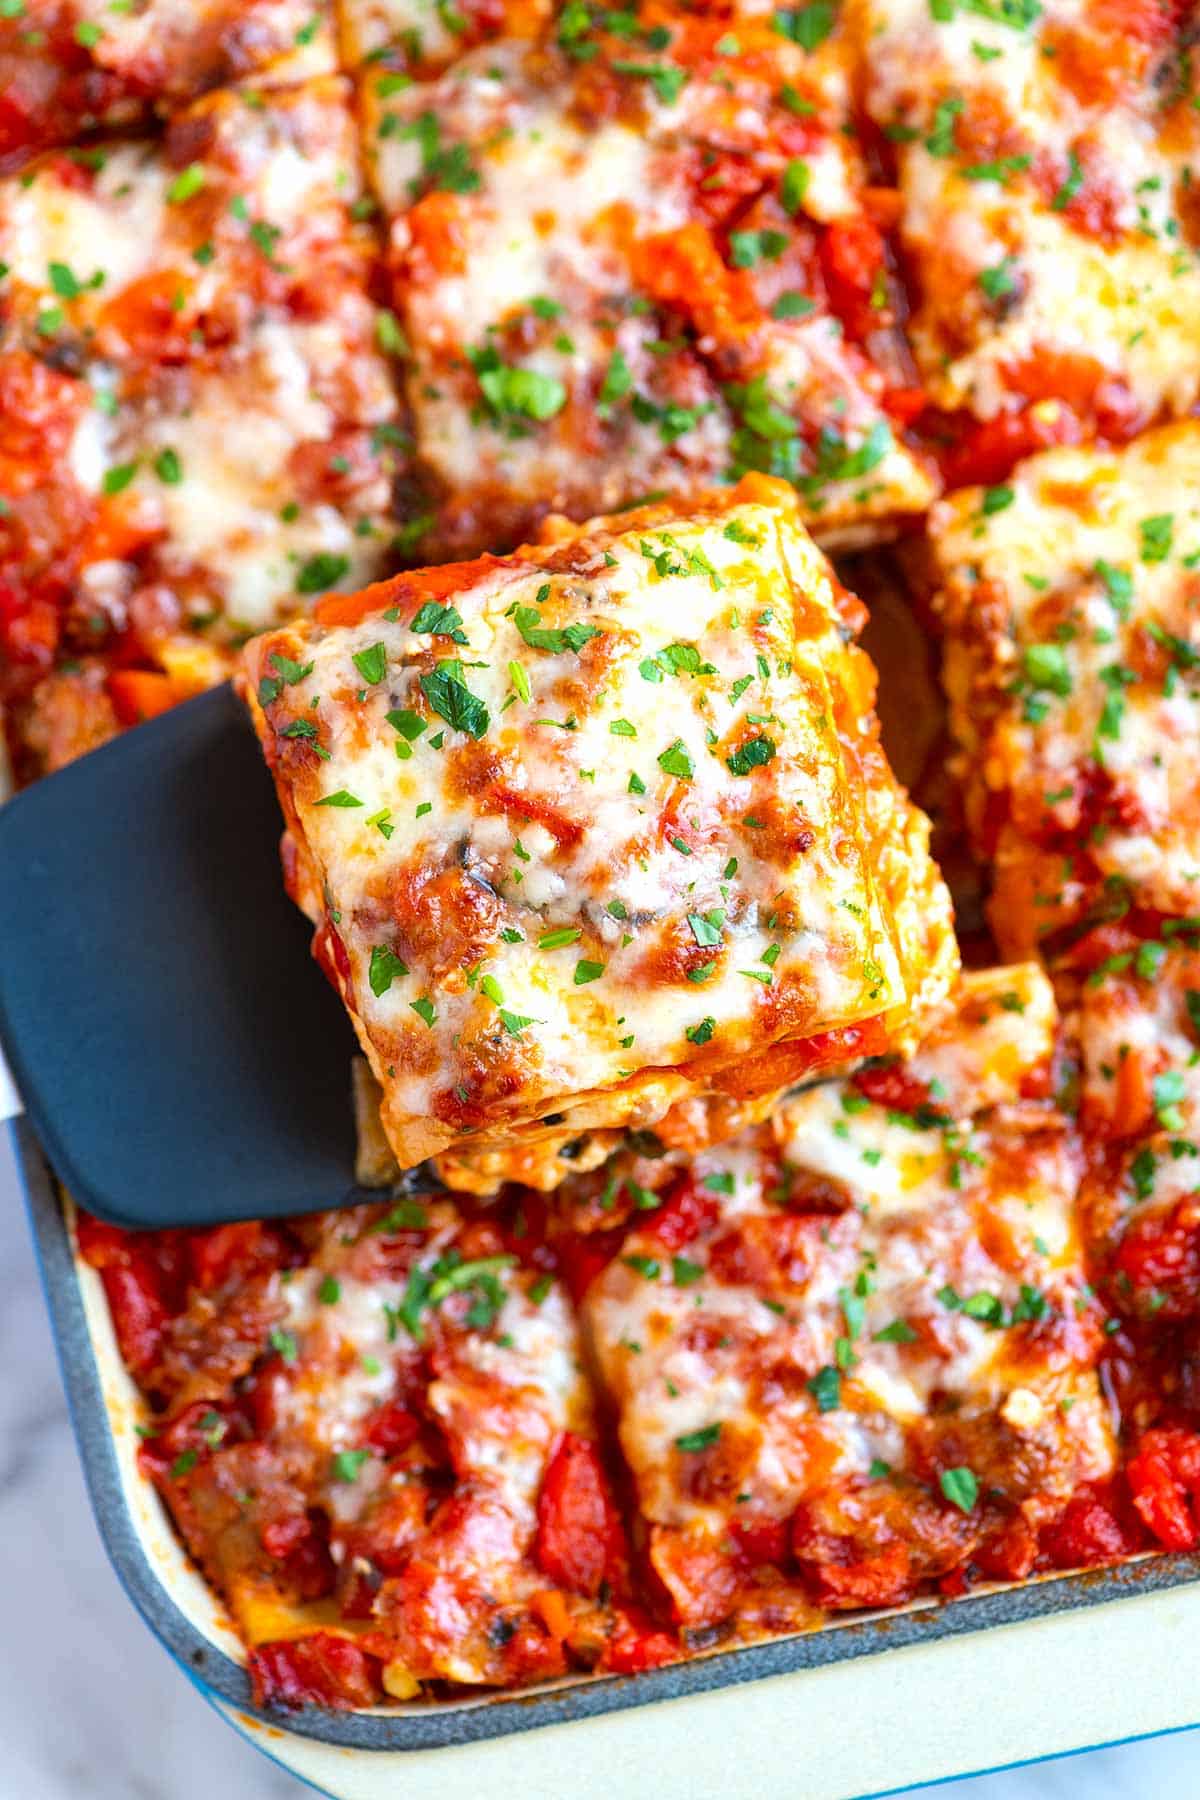 Easy Homemade Lasagna with Meat Sauce